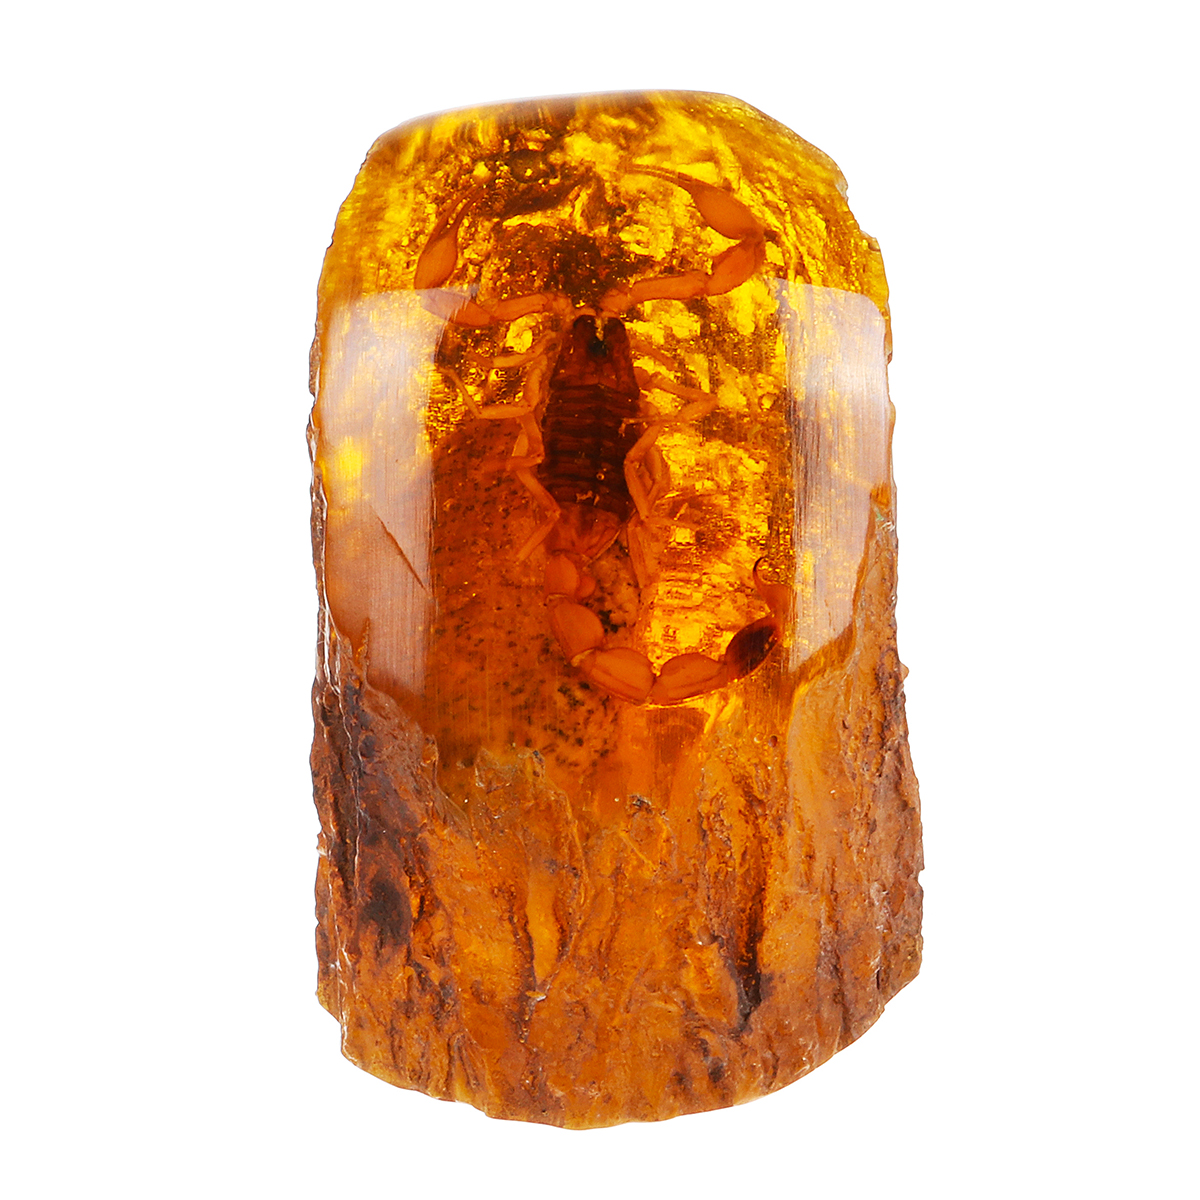 

Amber Scorpion Amber Fossil True Insect Specimens Manual Decorations Gifts